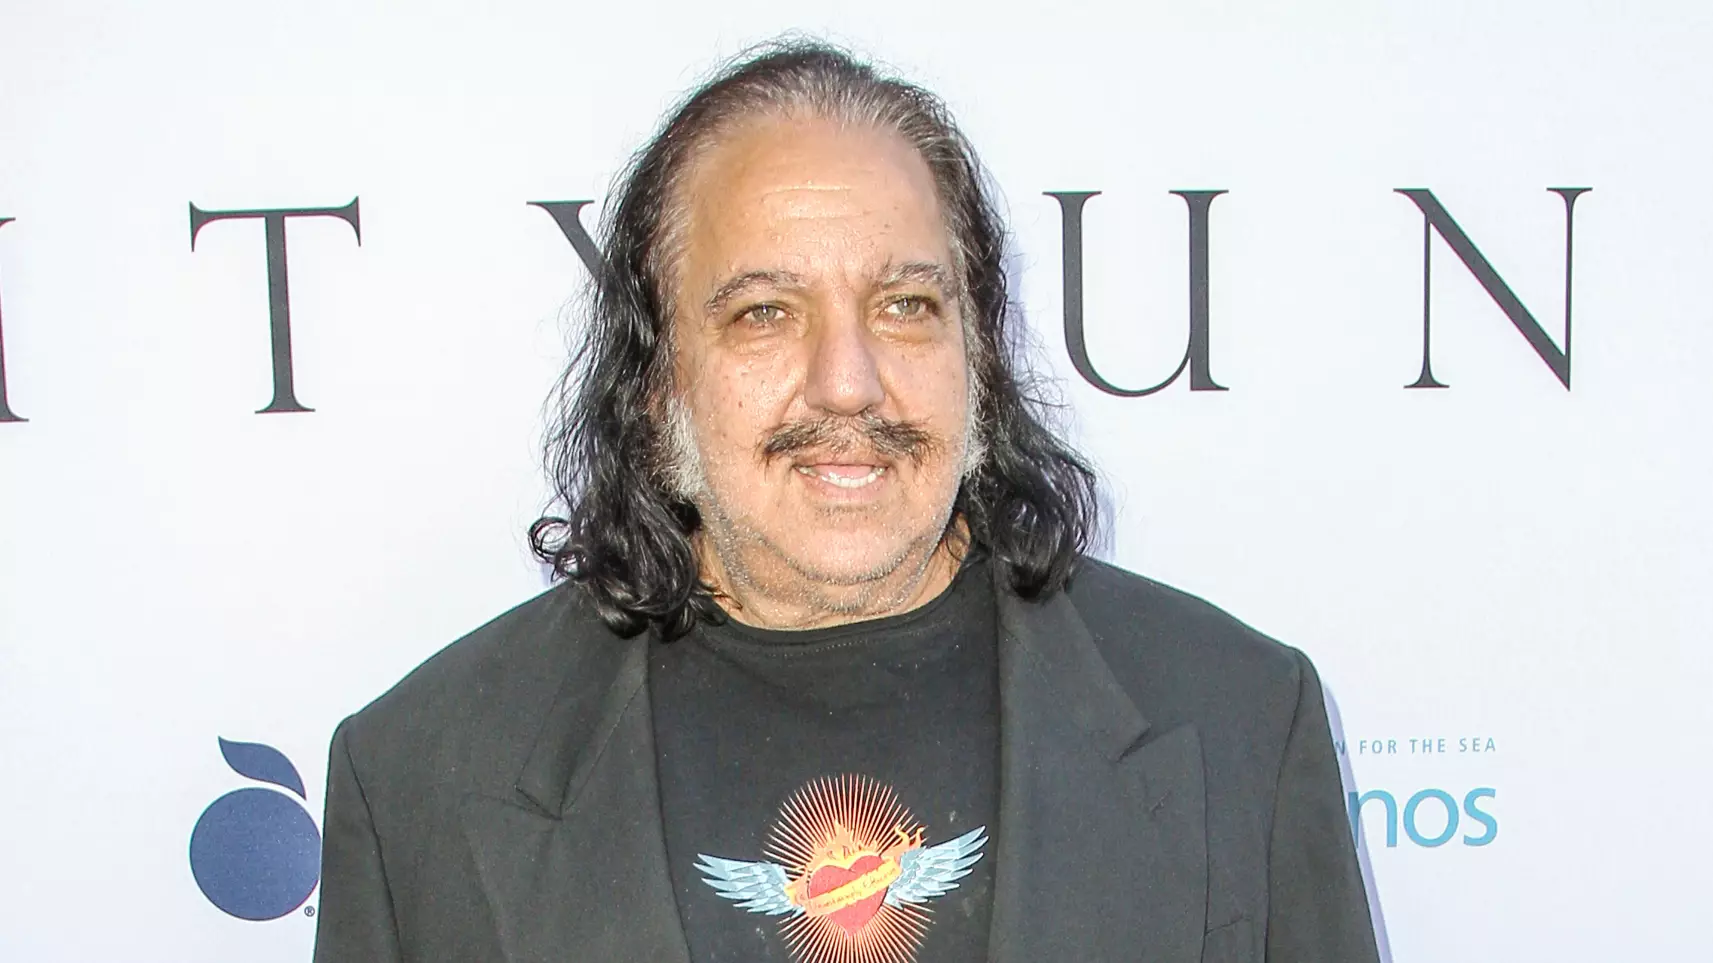 Ron Jeremy Charged With Eight Counts Of Sexual Assault Including Rape